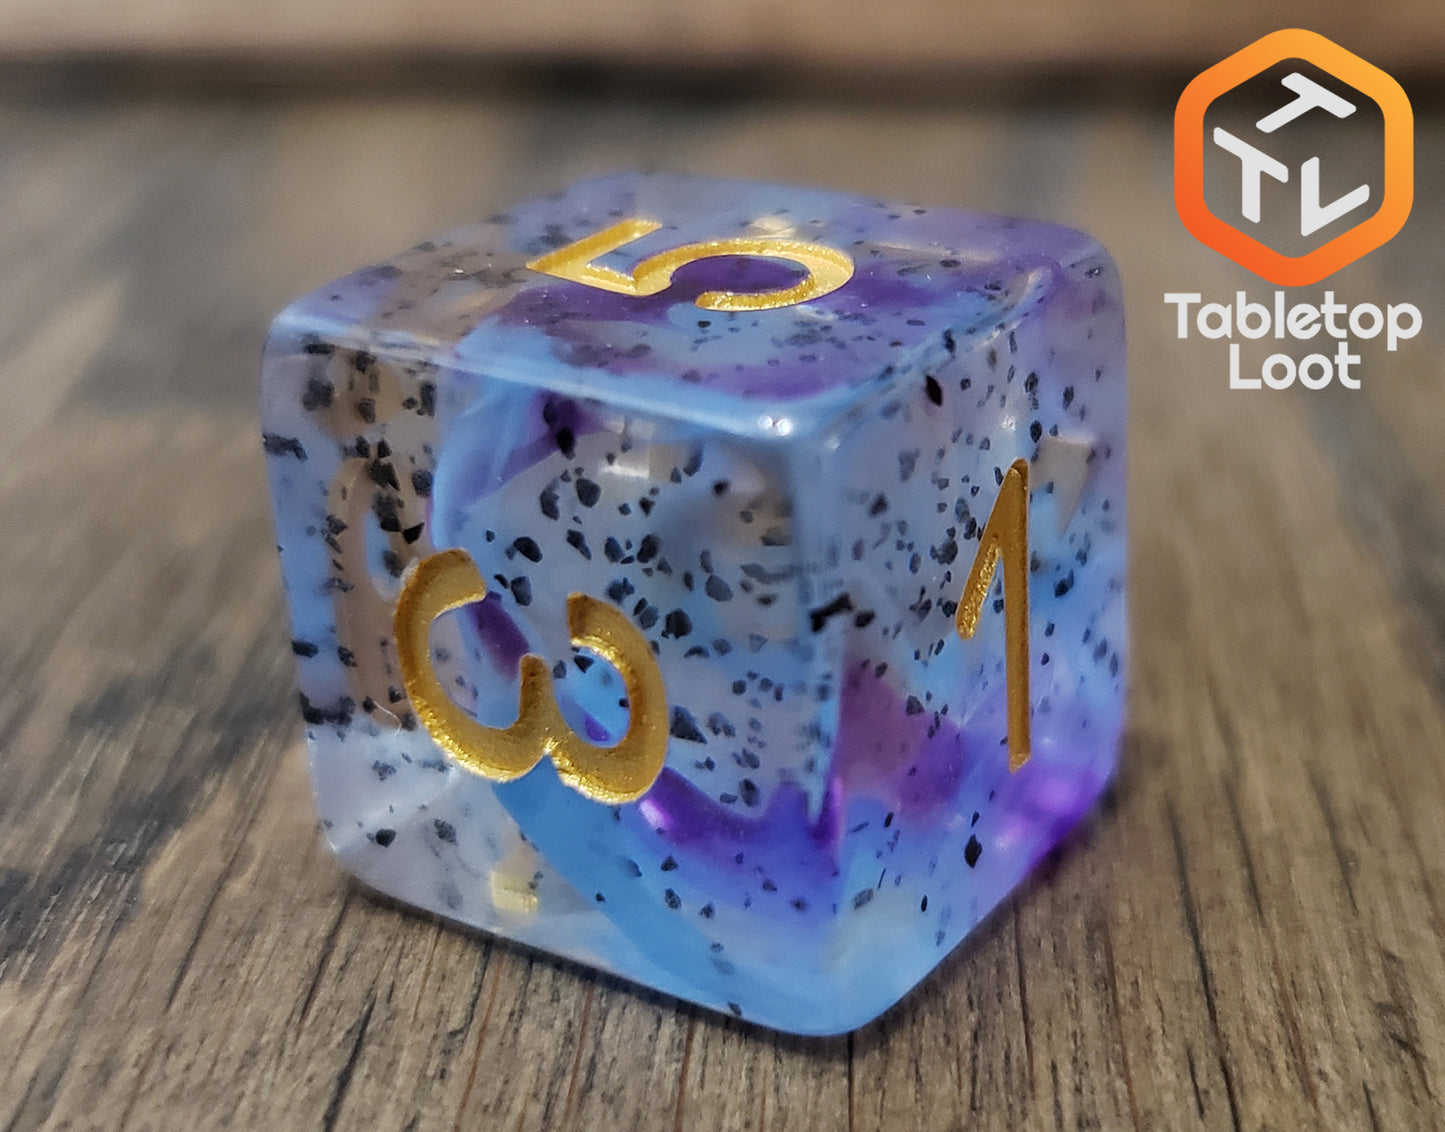 A close up of the D6 from the Infestation 7 piece dice set from Tabletop Loot with swirls of blue and purple and dark speckles suspended in a clear resin with gold numbering.